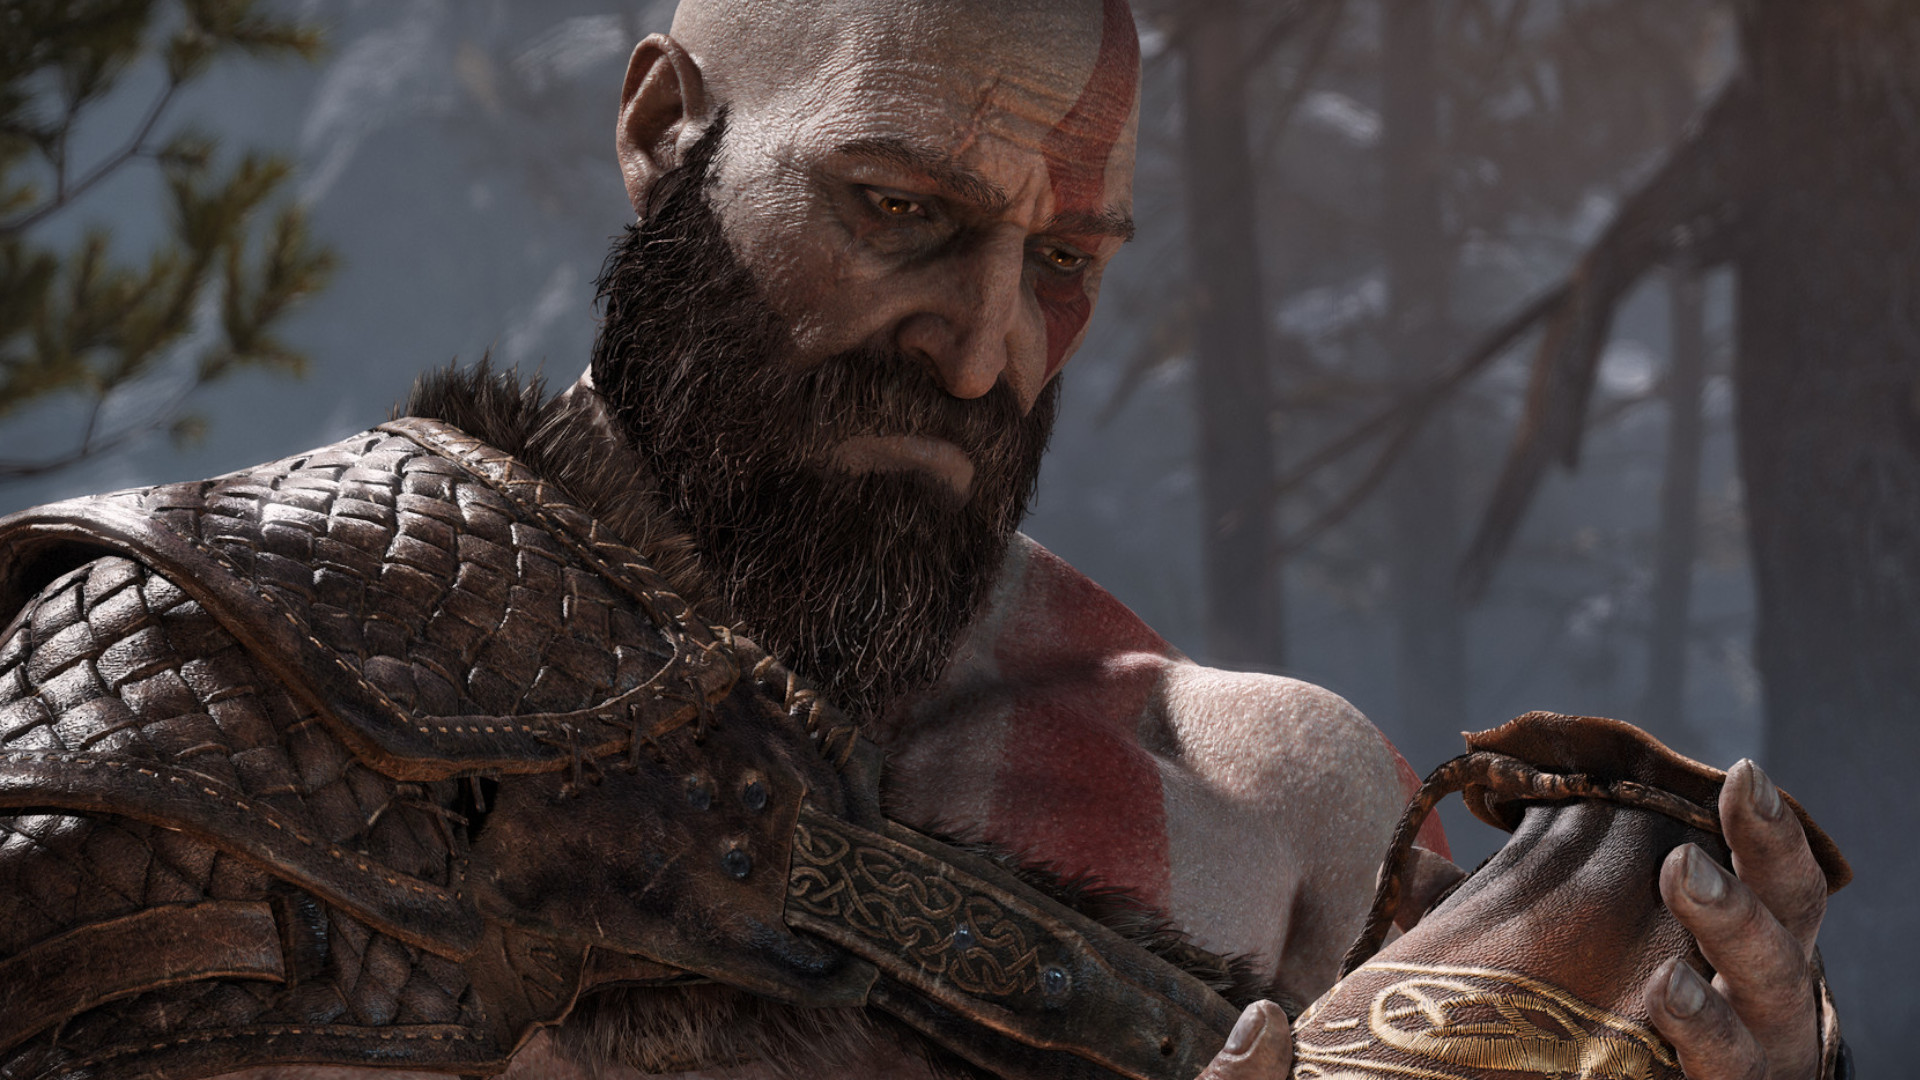 Sony won't add exclusive fullscreen to God of War on PC